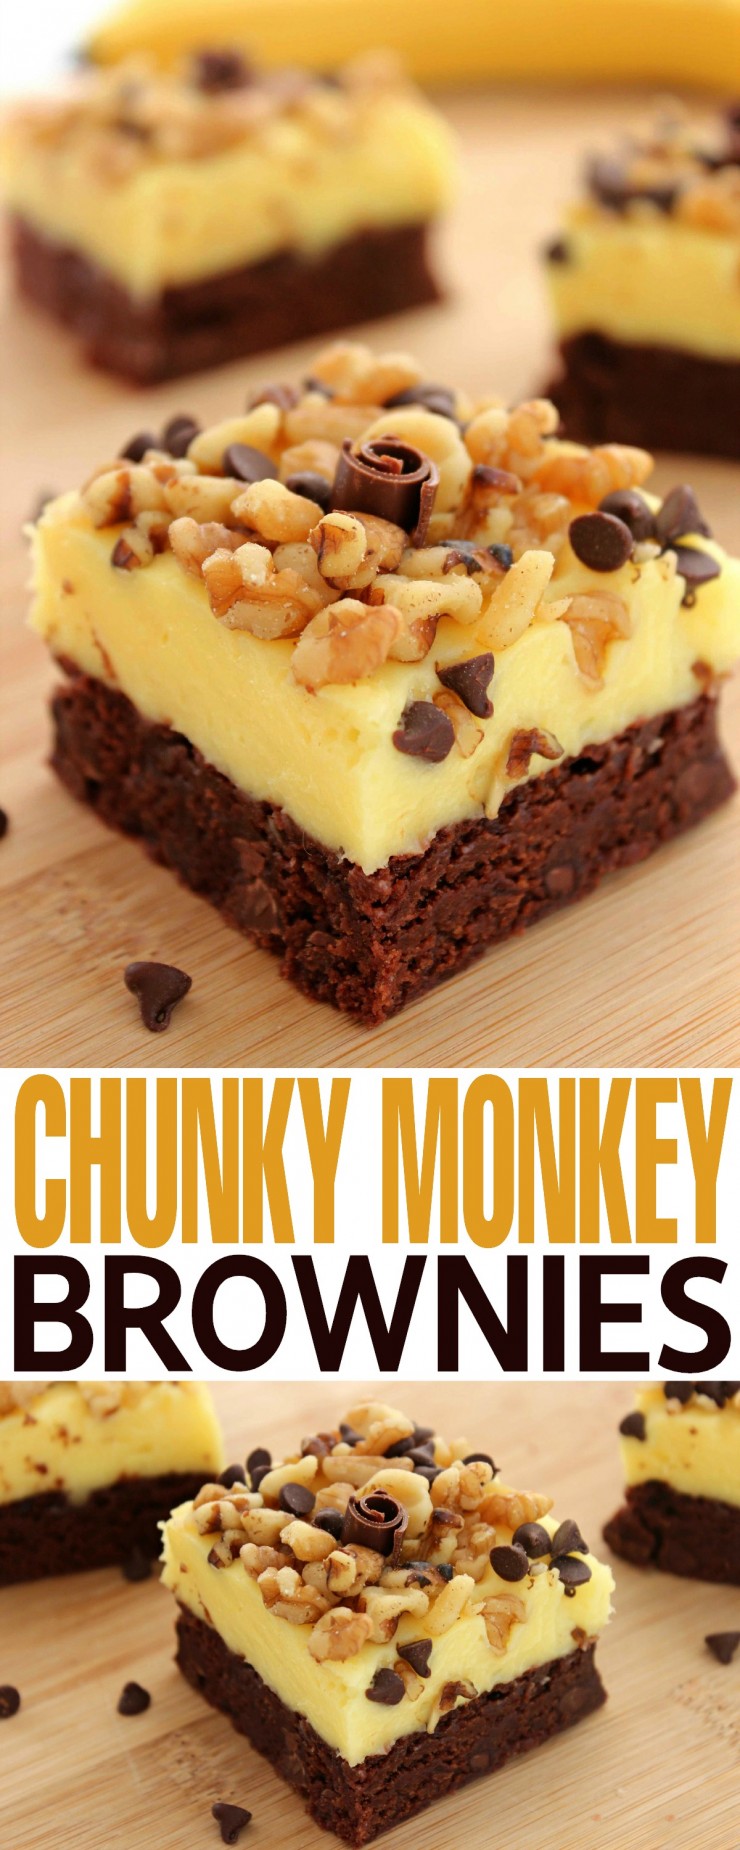 These Chunky Monkey Brownies are a perfect treat with chocolate, banana and walnuts coming together for one amazing dessert!